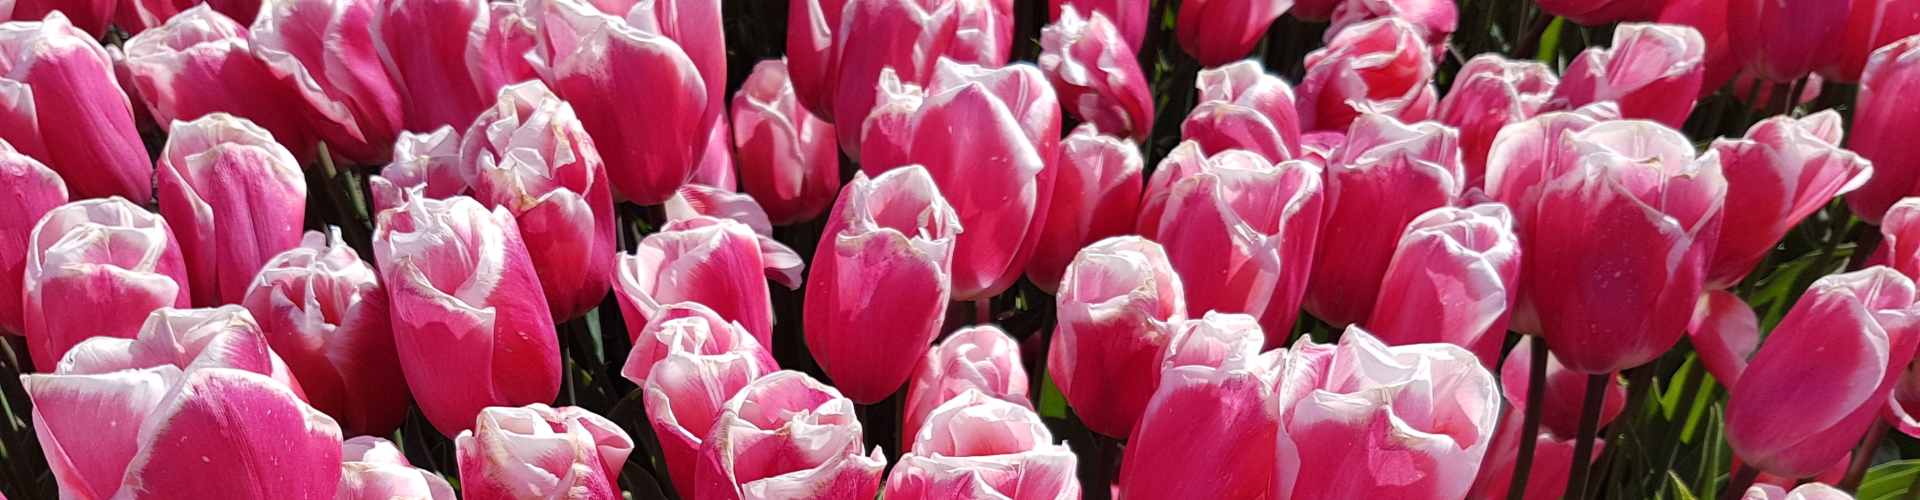 Pink Tulips with white edge in Holland